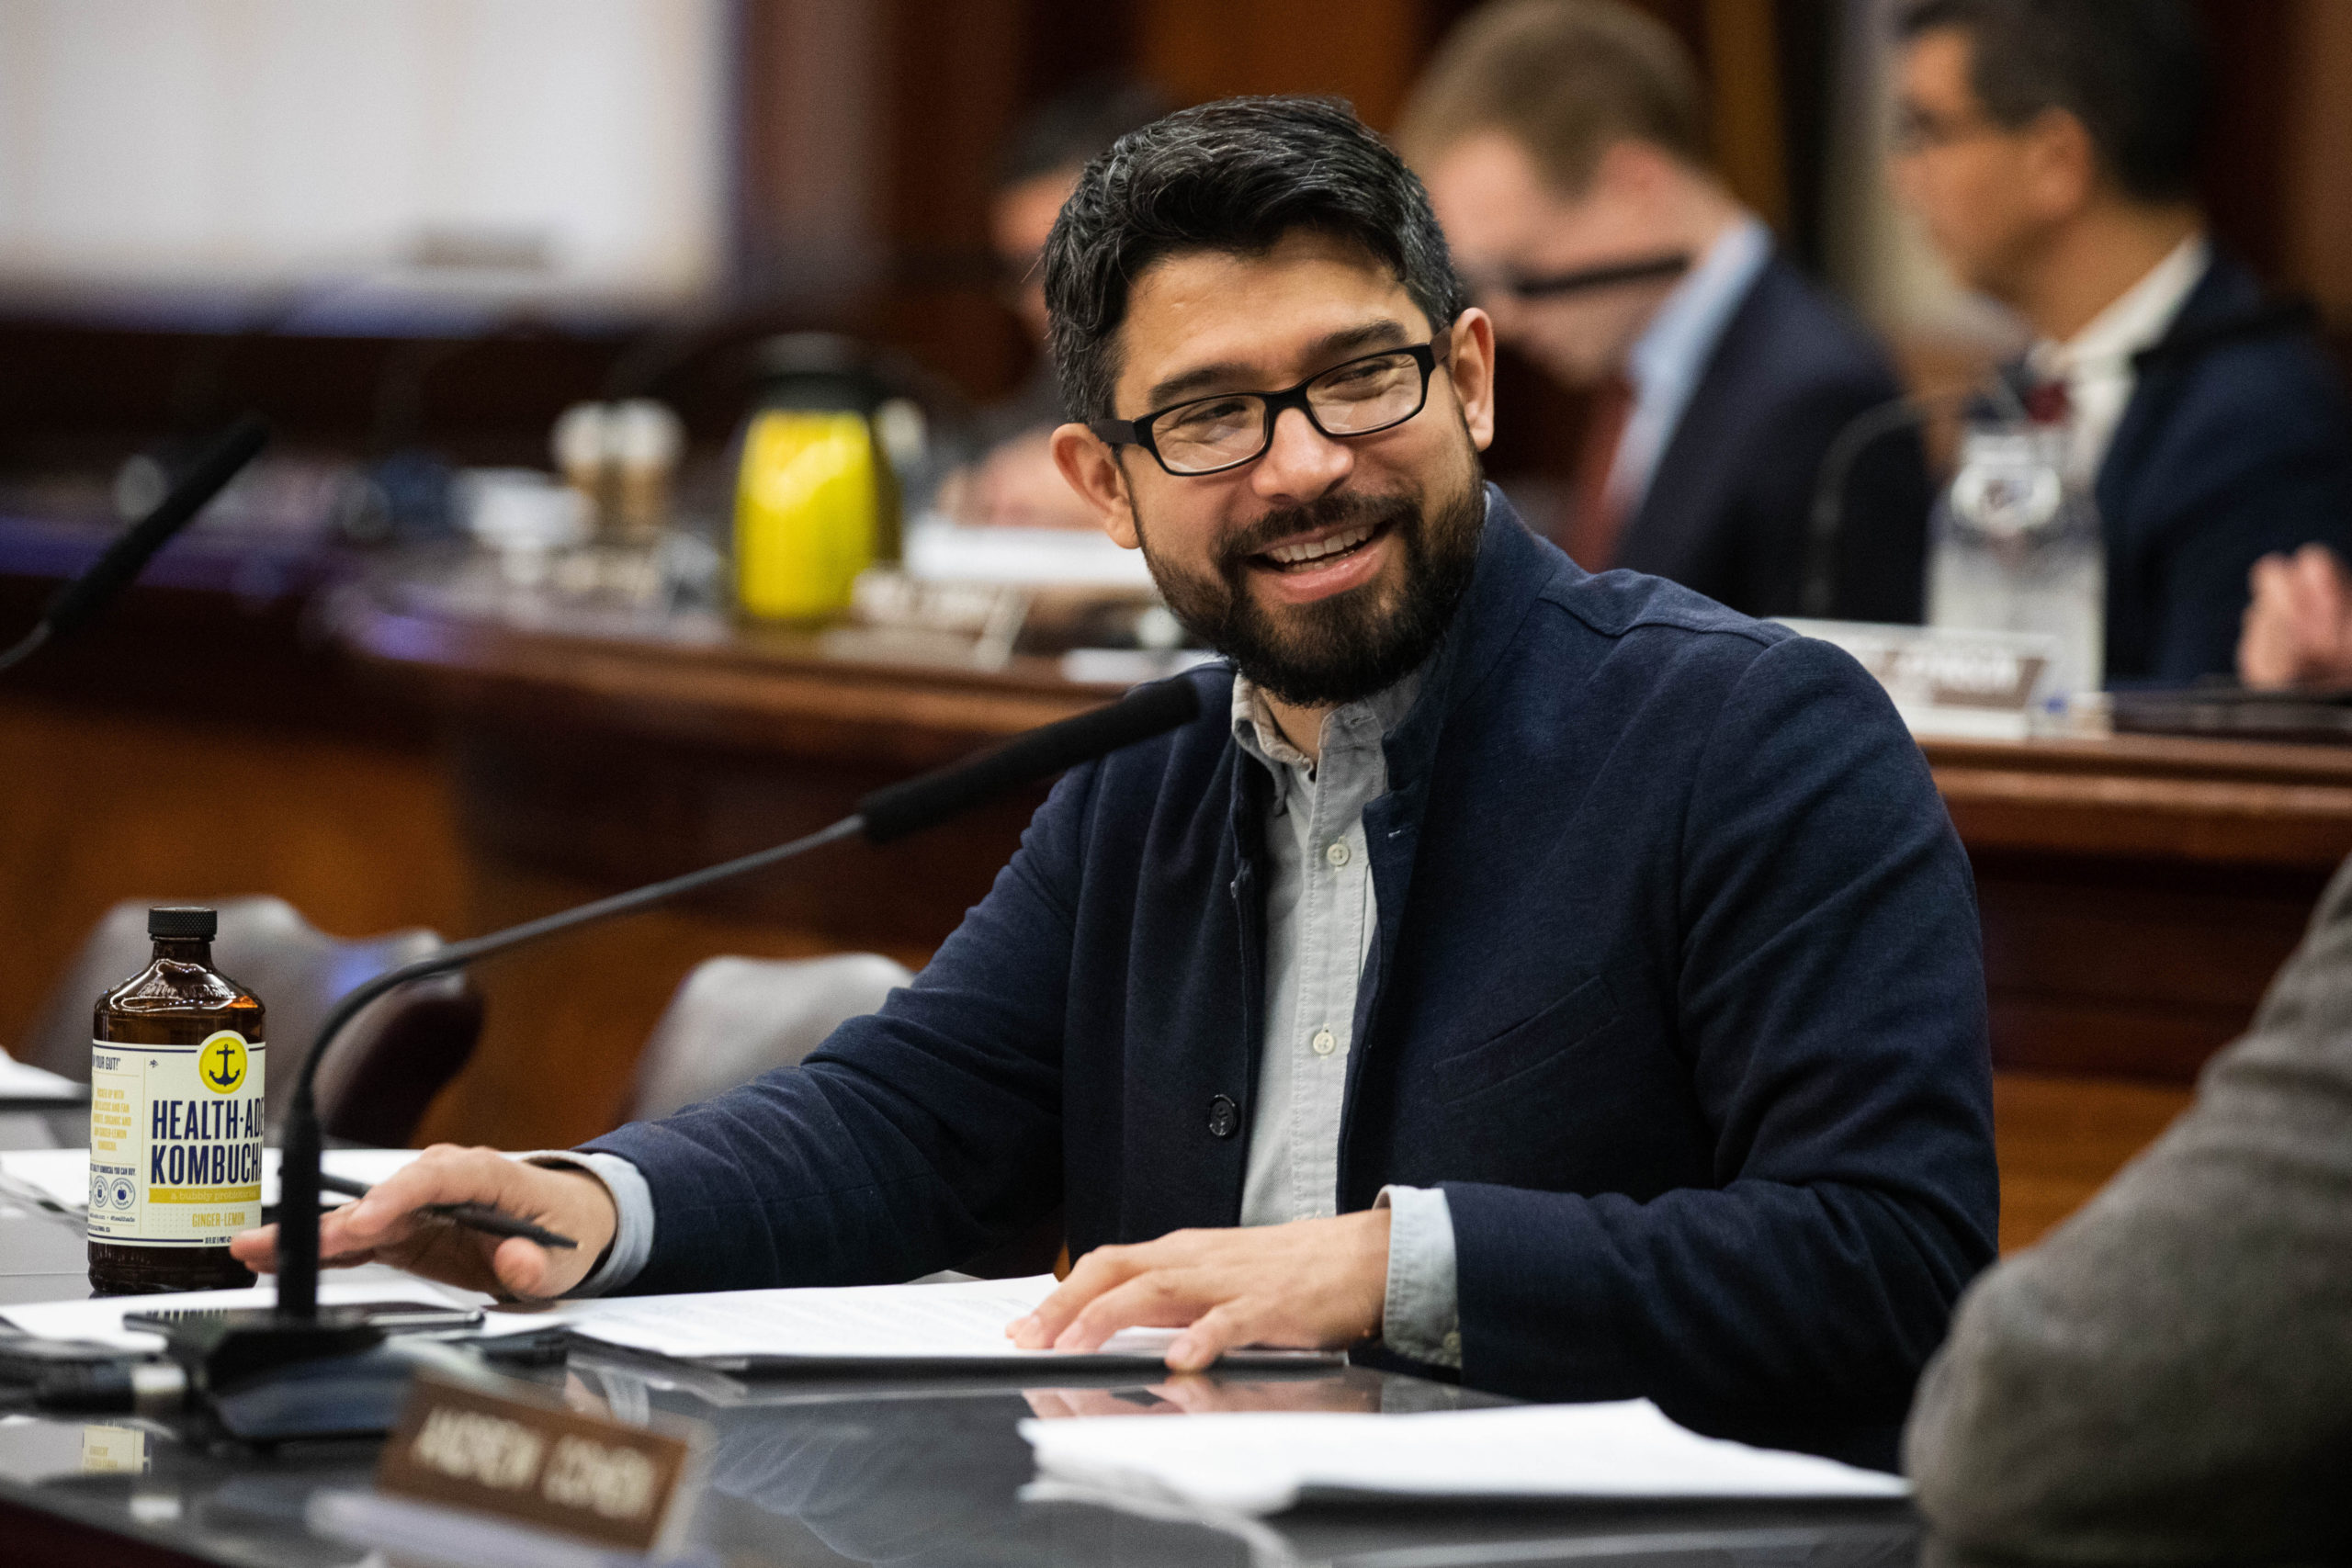 Councilmember Carlos Menchaca at a hearing in the City Council Committee on Transportation on the future of the Brooklyn-Queens Expressway on Feb. 25, 2020 at City Hall. Photo: Paul Frangipane/Brooklyn Eagle